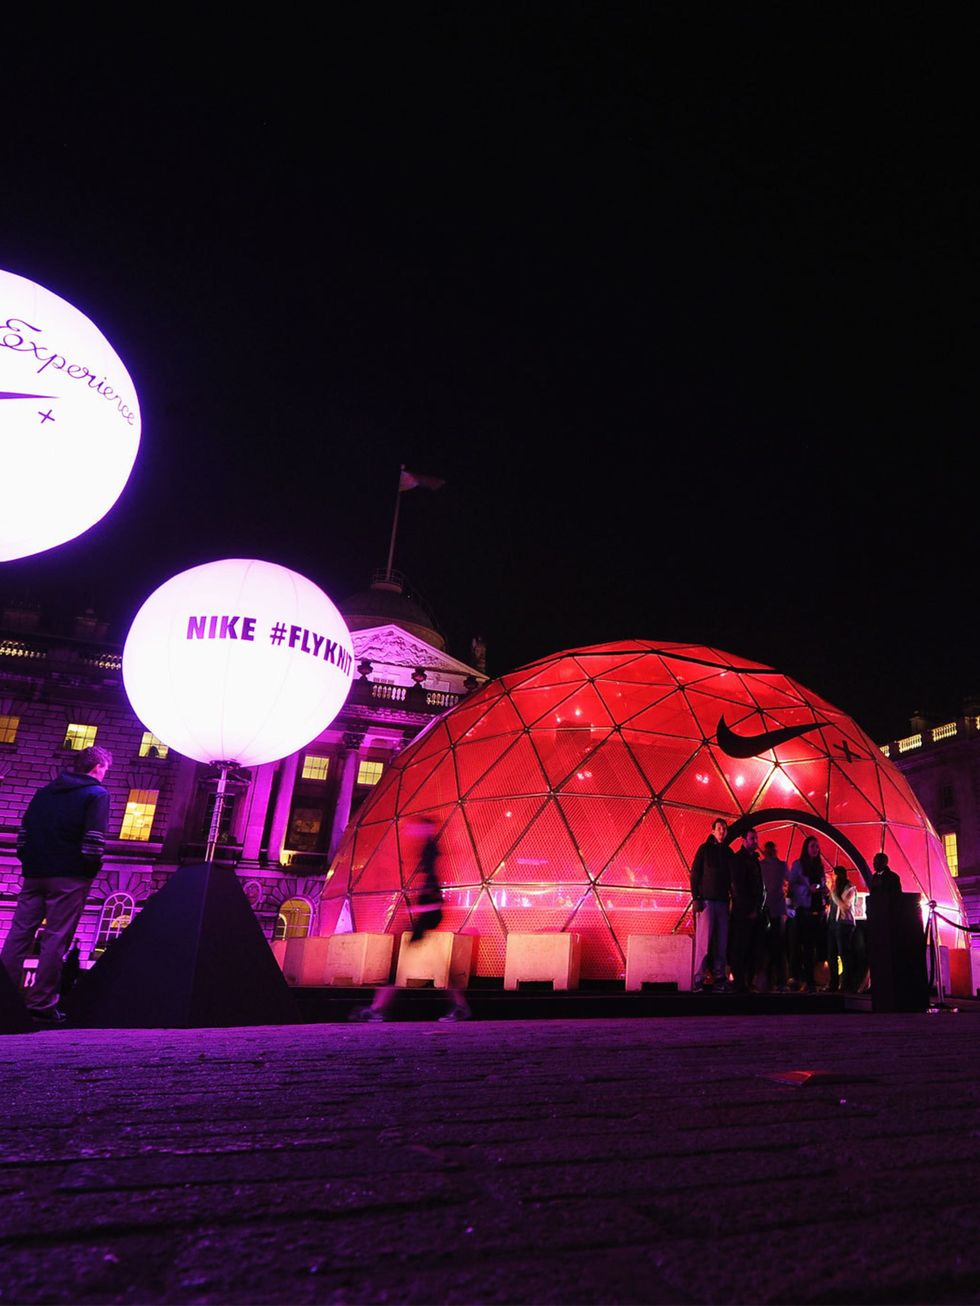 <p>The Nike Flyknit hub at Somerset House</p>